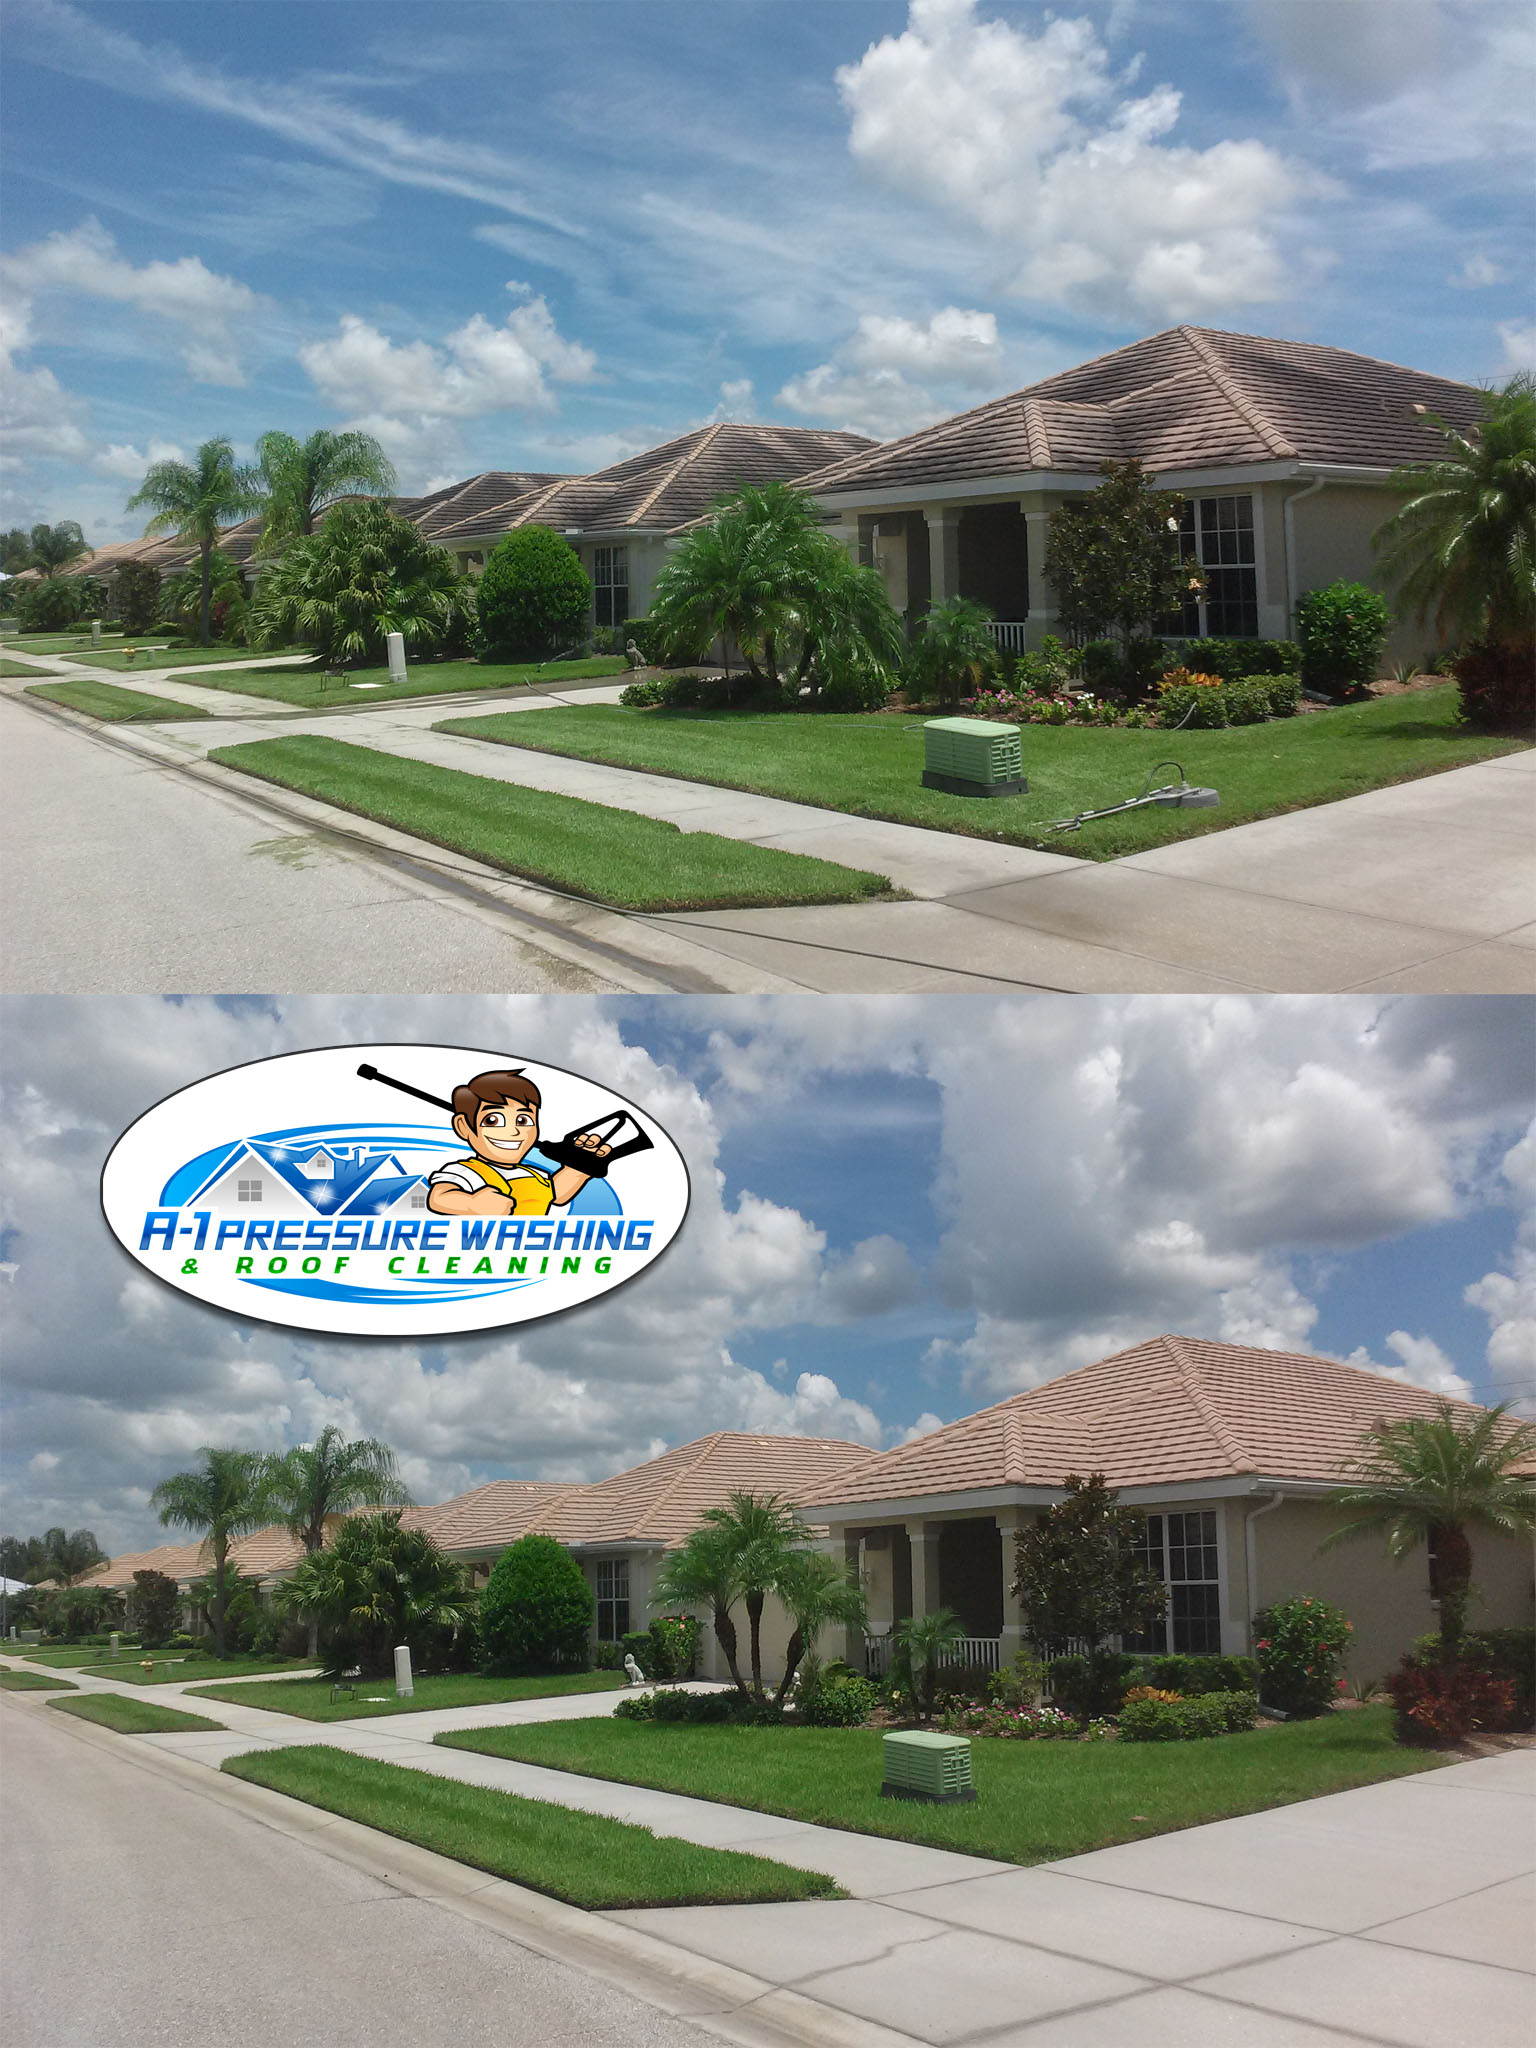 A-1 Pressure Washing & Roof Cleaning, Serving Sarasota, Charlotte, Manatee, and Lee Counties since  1996 - FREE ESTIMATES 941-815-8454